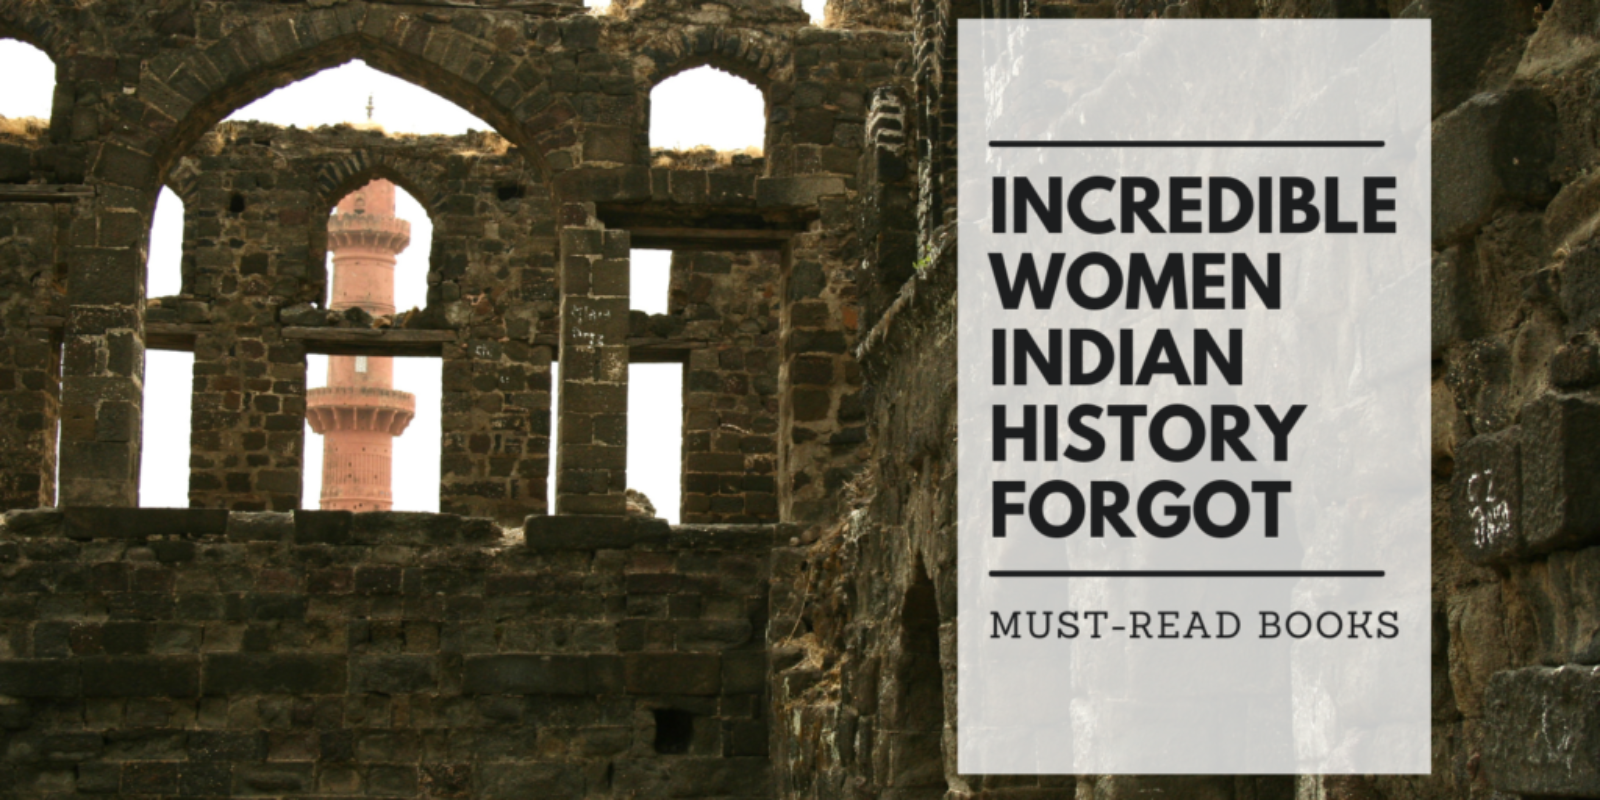 Incredible Women Indian History Forgot Must-Read Books